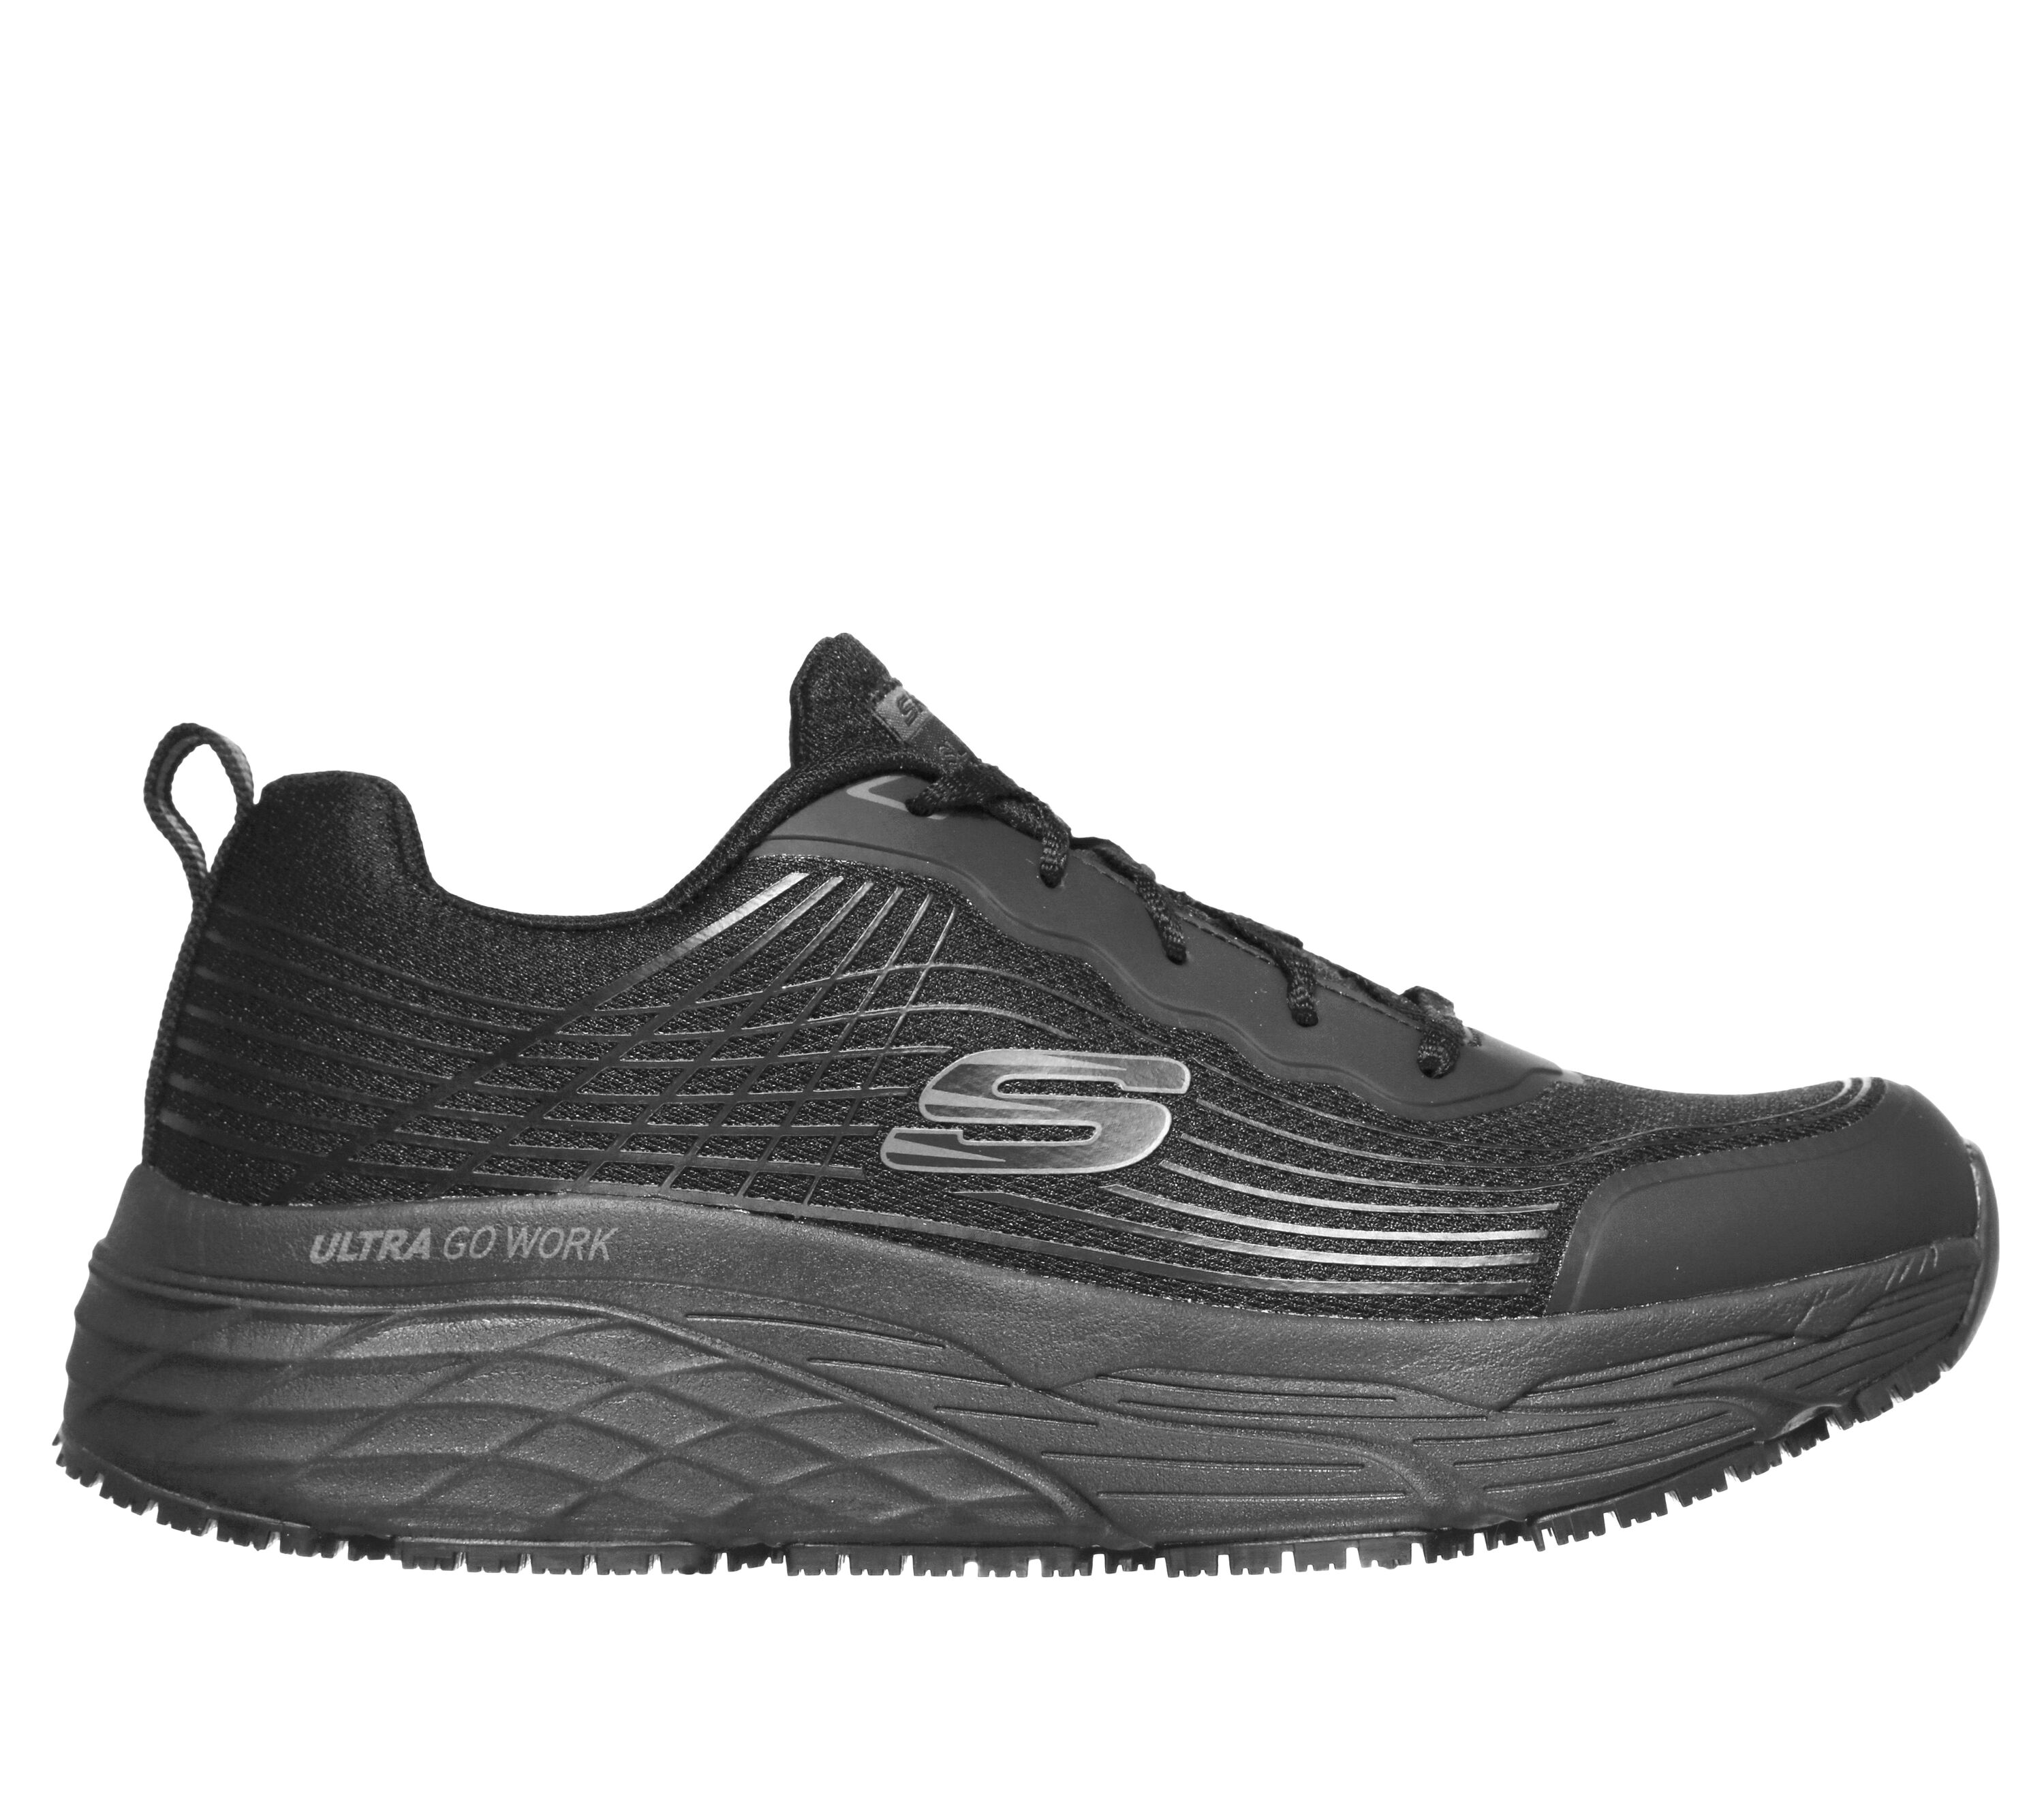 Shop the Work Relaxed Fit: Max Cushioning Elite SR - Rytas | SKECHERS